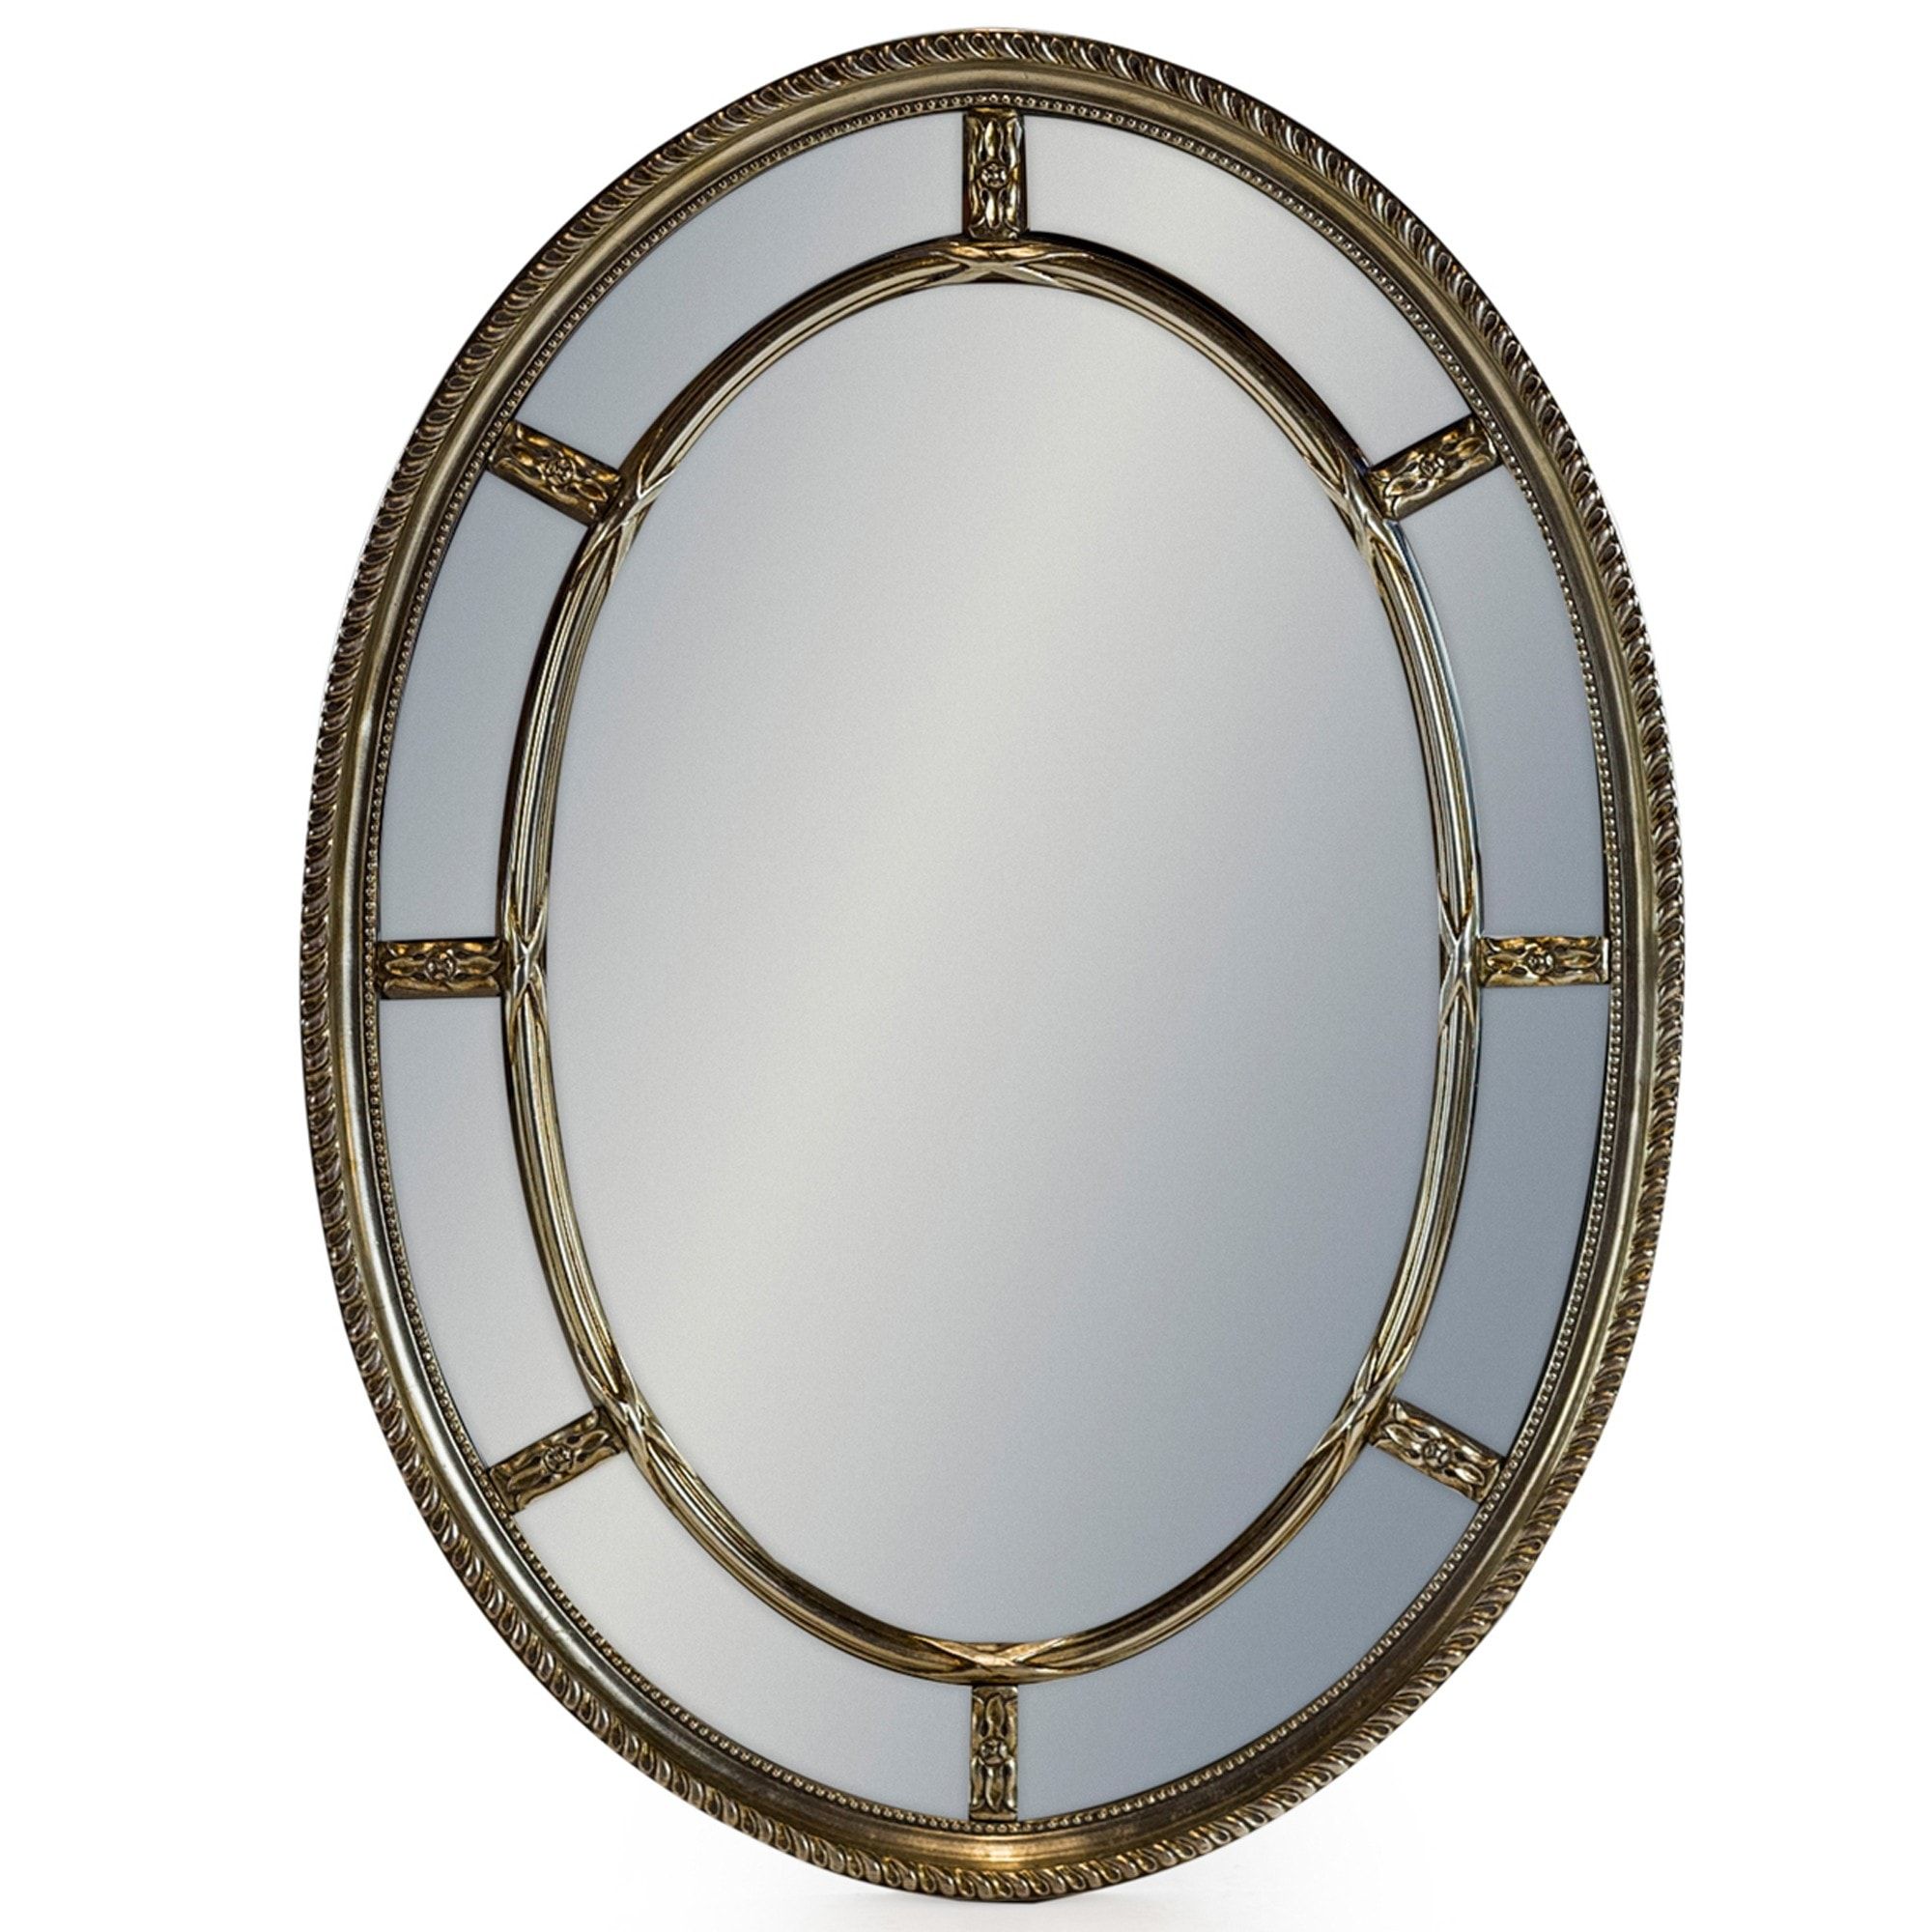 Silver Antique French Style Oval Multi Mirror | Decorative Silver For Antiqued Silver Quatrefoil Wall Mirrors (View 2 of 15)